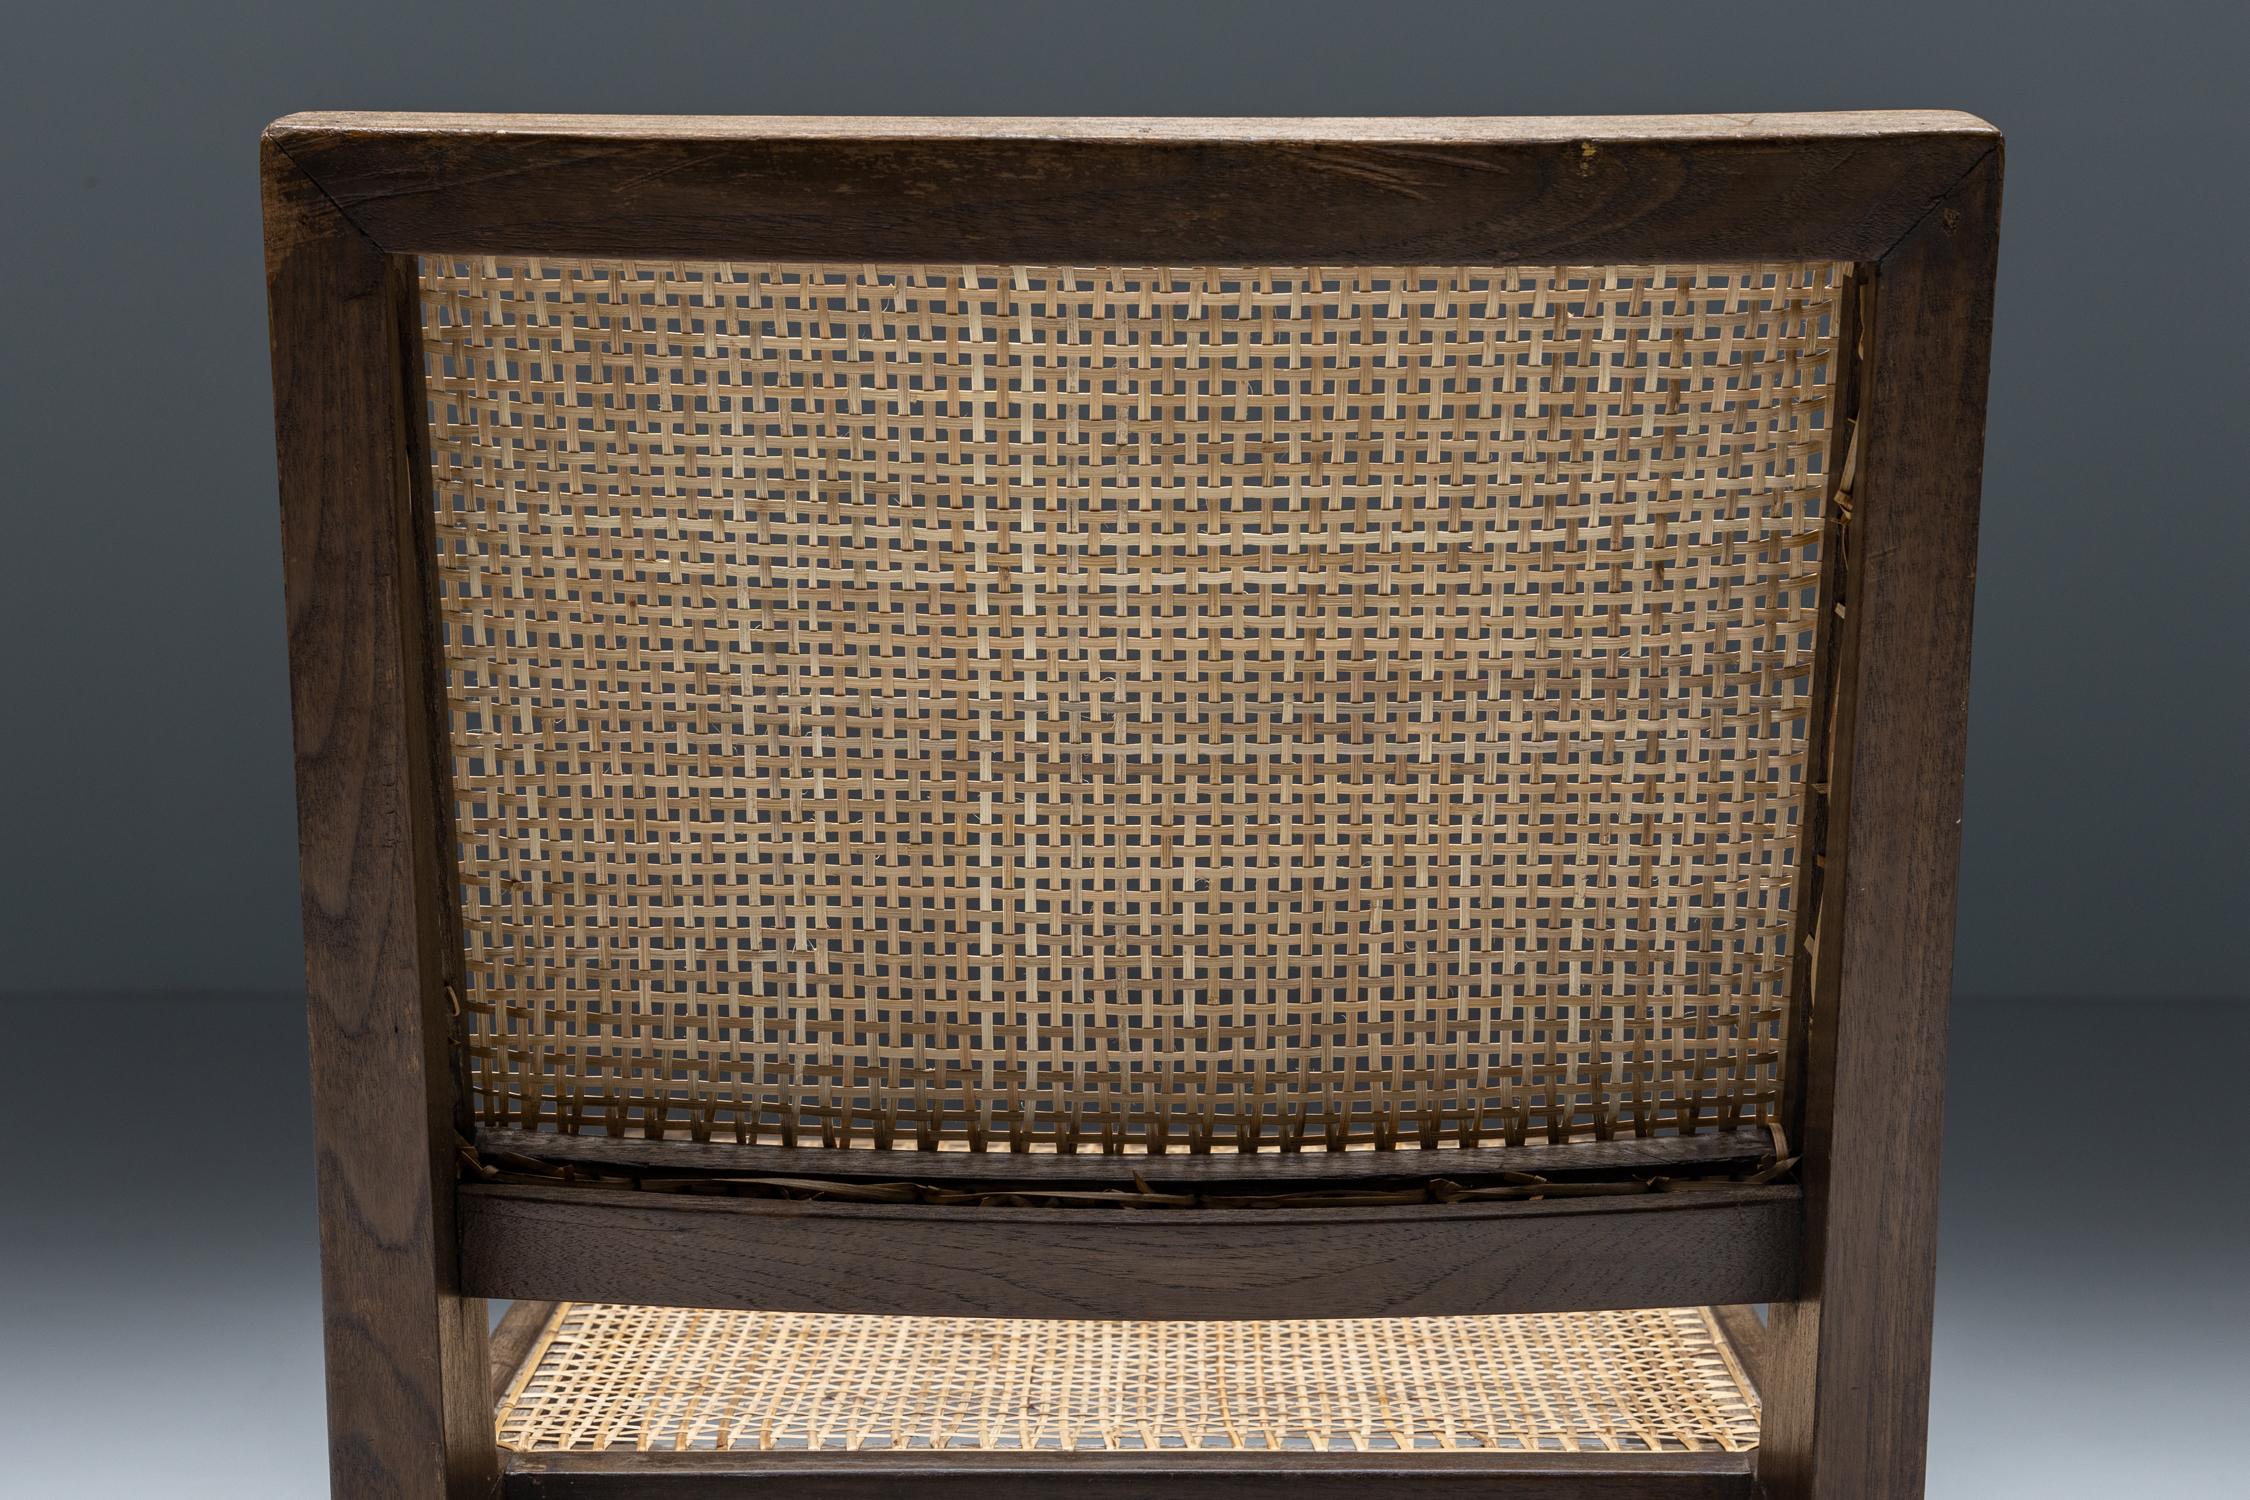 Armless Easy Chair by Pierre Jeanneret rattan, teak & wood, Chandigarh, 1960s For Sale 1